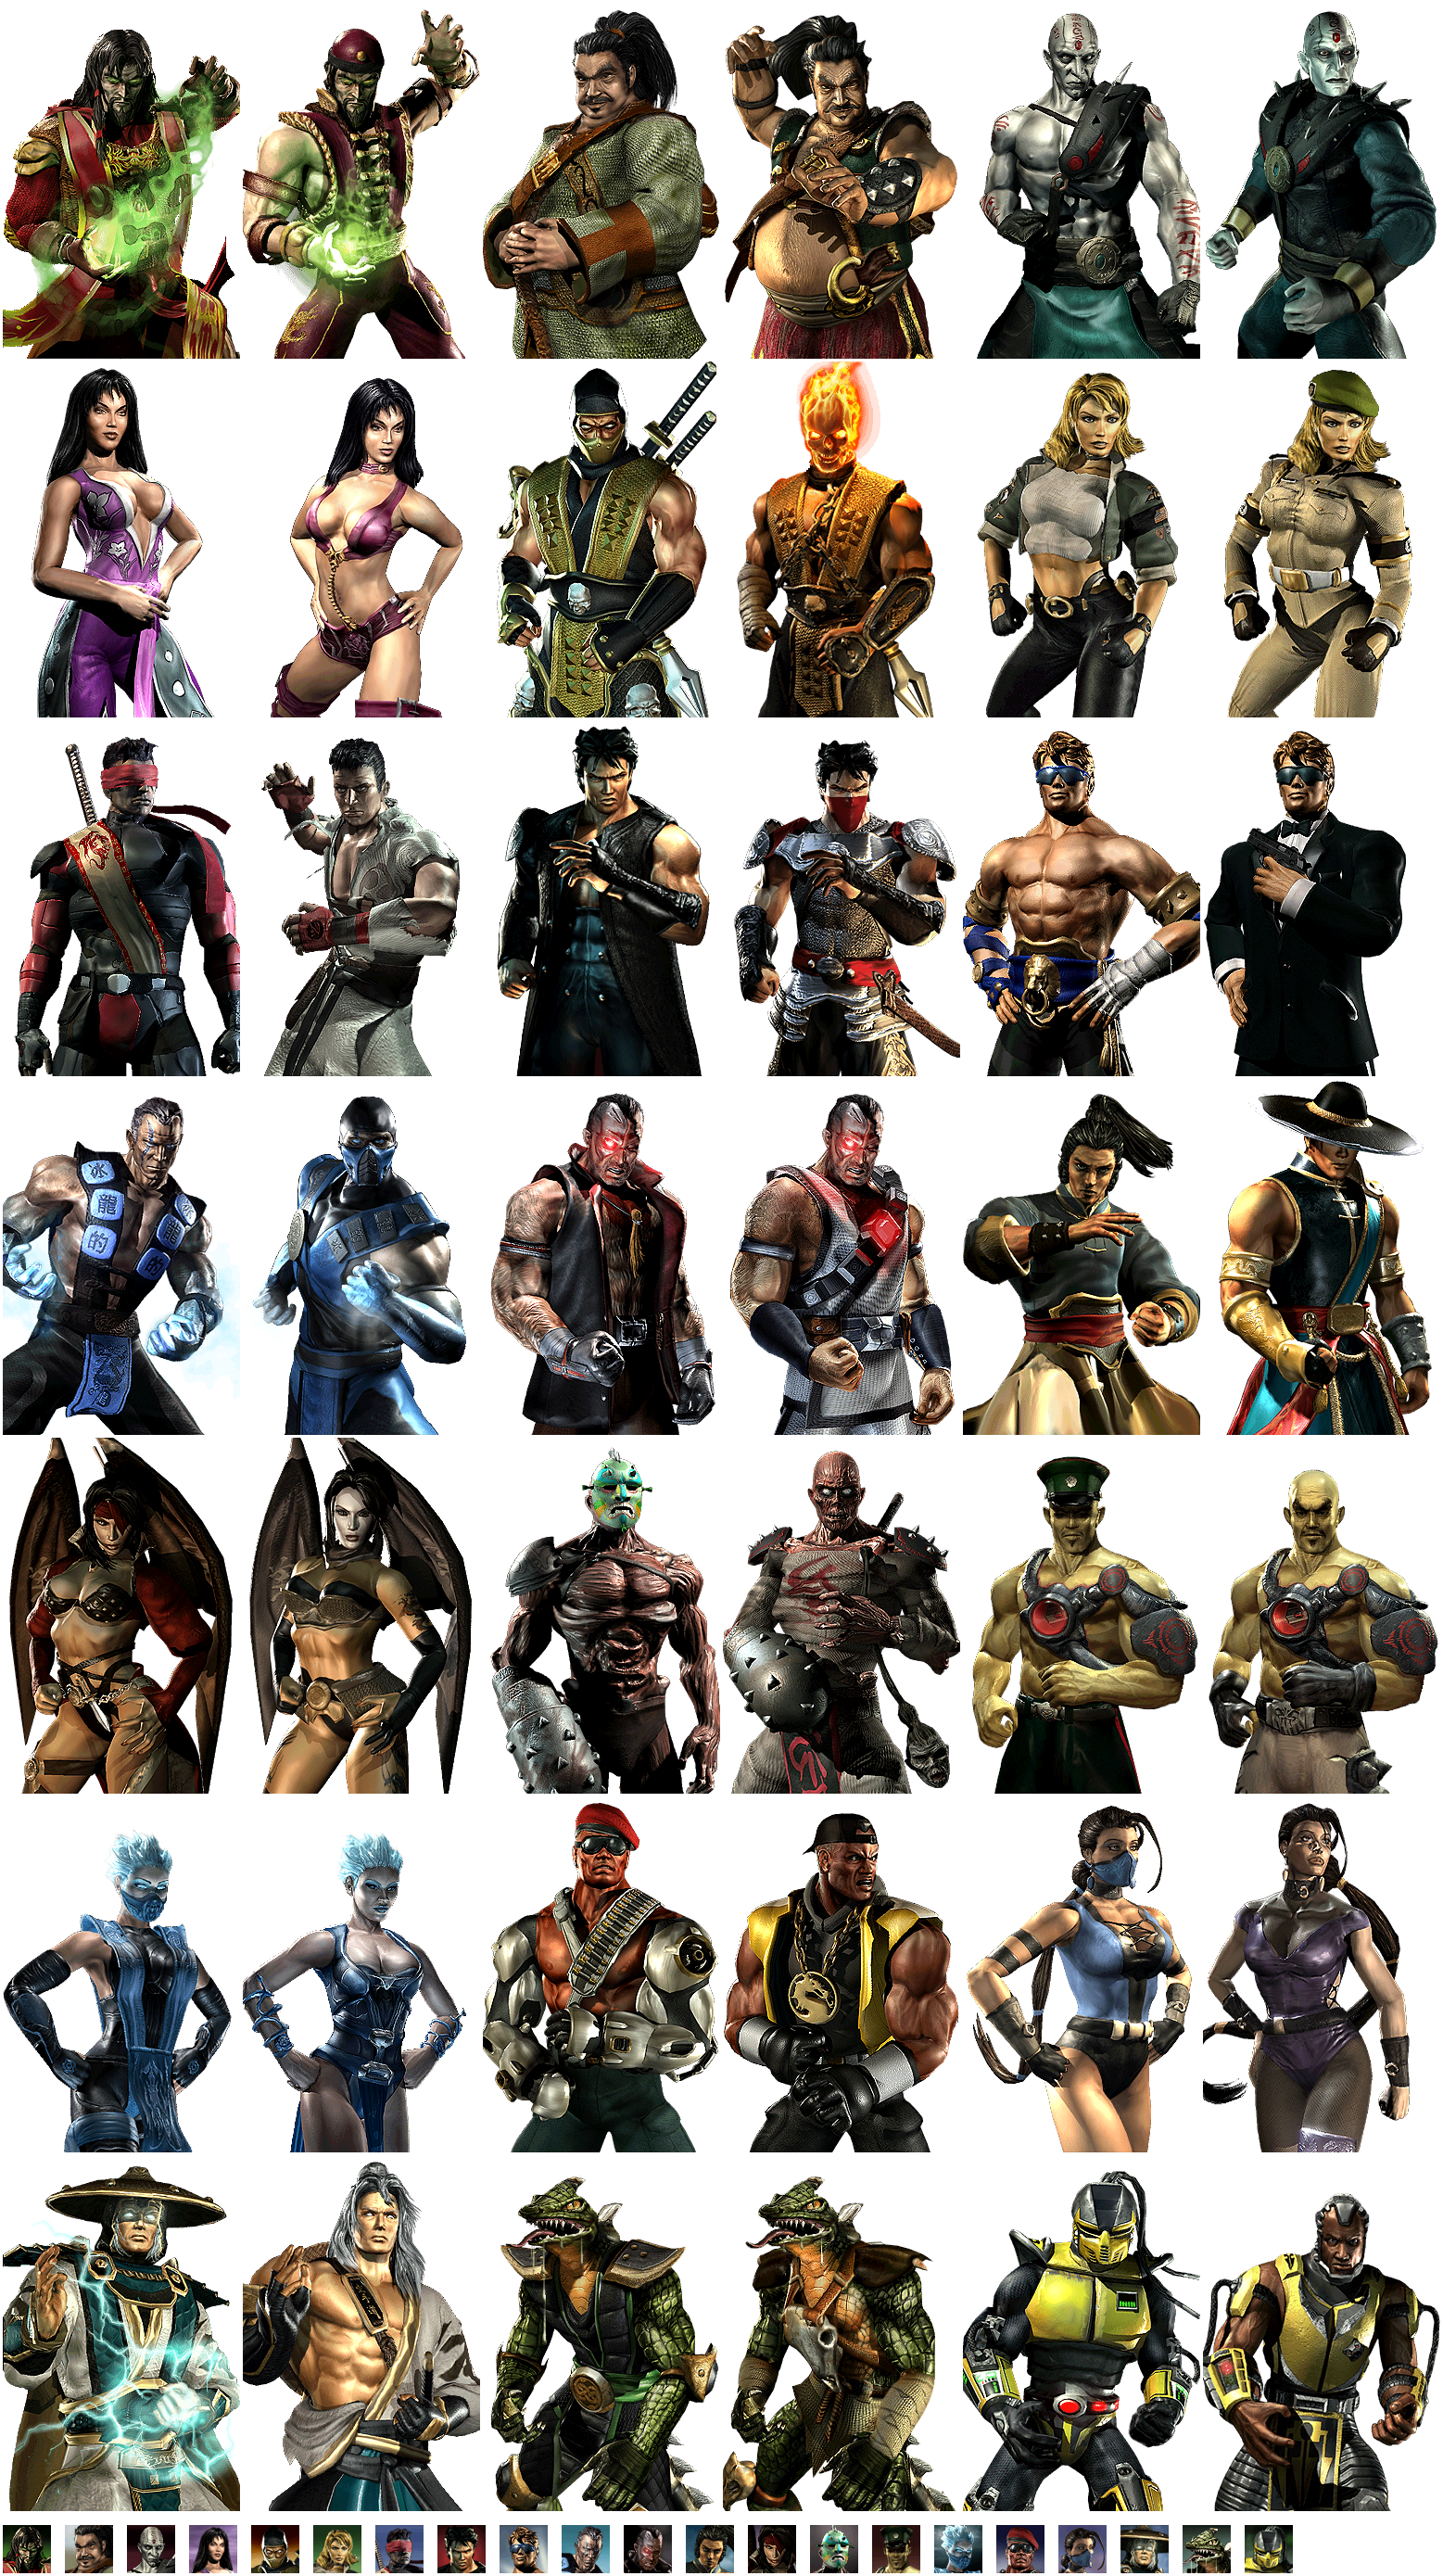 PC / Computer - Mortal Kombat X - Character Select Icons - The Spriters  Resource